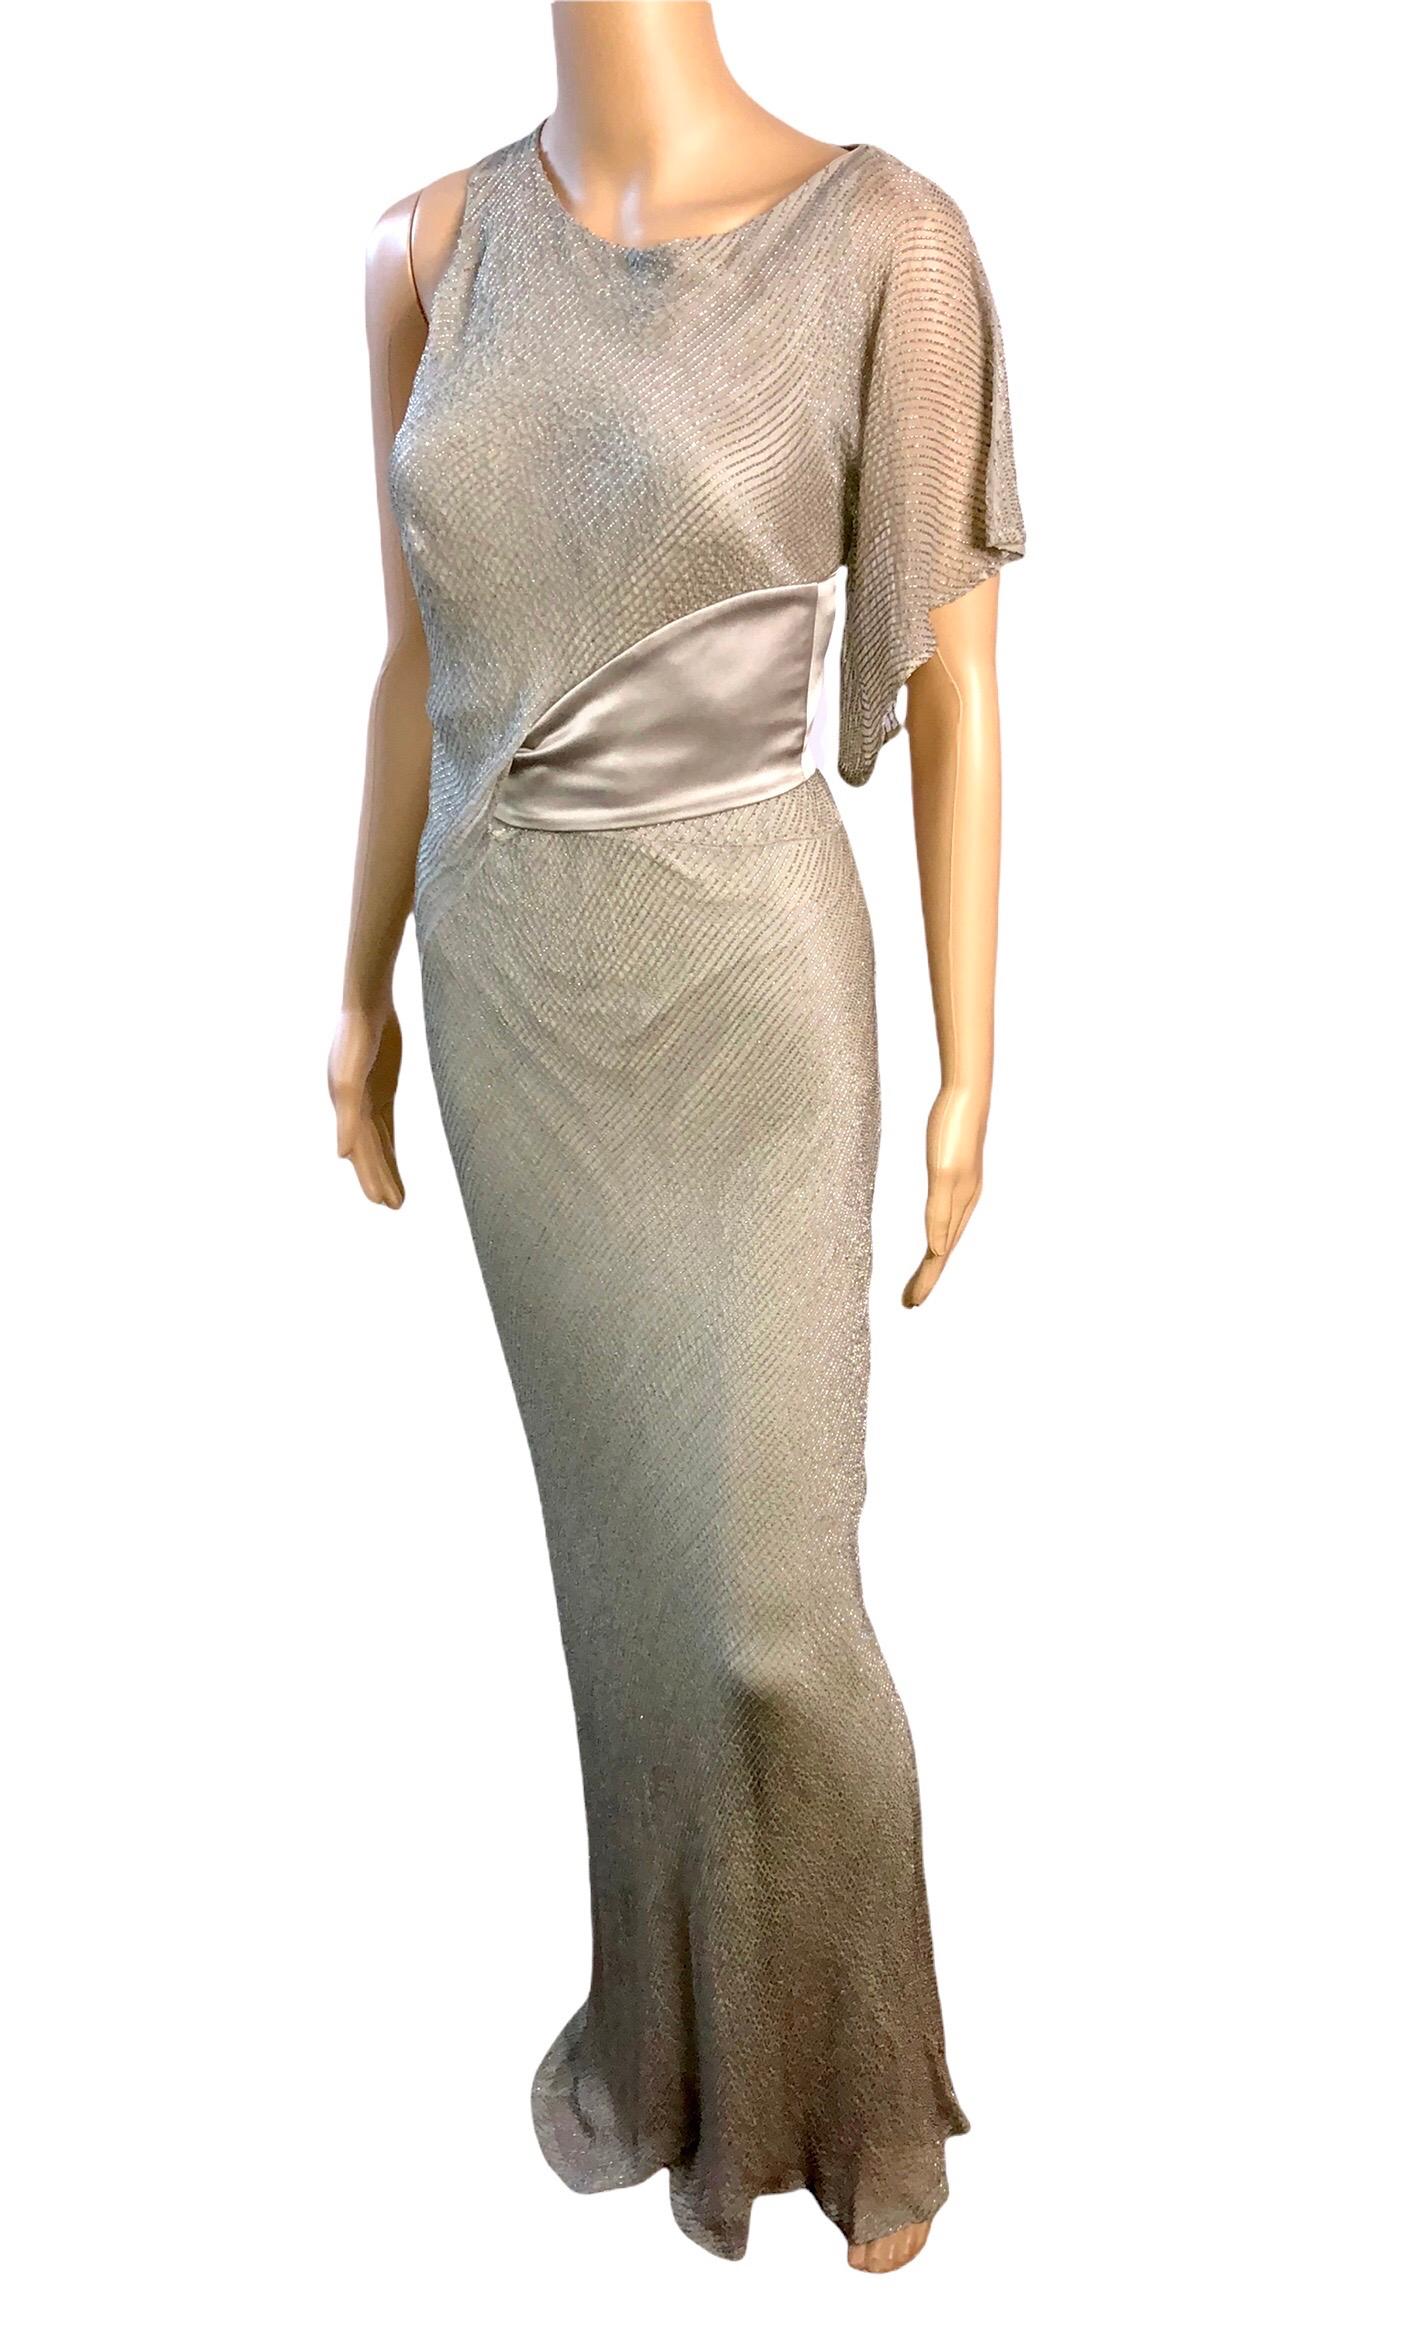 Versace F/W 2009 Runway Embellished Cutout Belted Silk Evening Dress Gown  For Sale 2